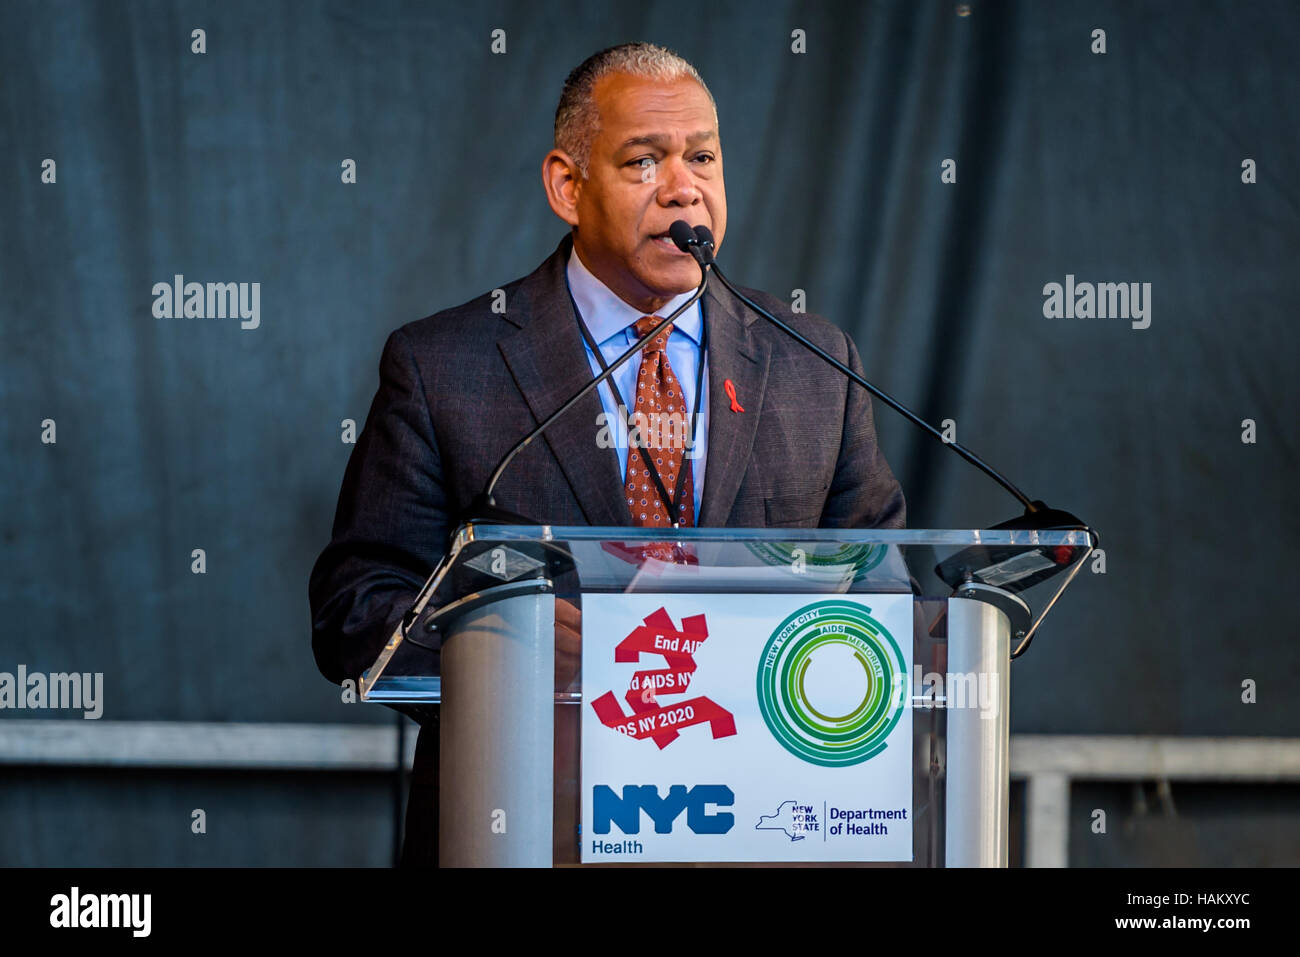 New York, United States. 01st Dec, 2016. Mitchell J. Silver, Commissioner of the New York City Department of Parks and Recreation - Community leaders, activists, and elected officials gathered for a World AIDS Day program and formal dedication ceremony of New York City AIDS Memorial Park at St. Vincent's Triangle. The event was hosted by the New York City AIDS Memorial Board of Directors and representatives from End AIDS NY 2020, the New York City Department of Health and Mental Hygiene, and the New York State Department of Health. Credit:  Erik McGregor/Pacific Press/Alamy Live News Stock Photo